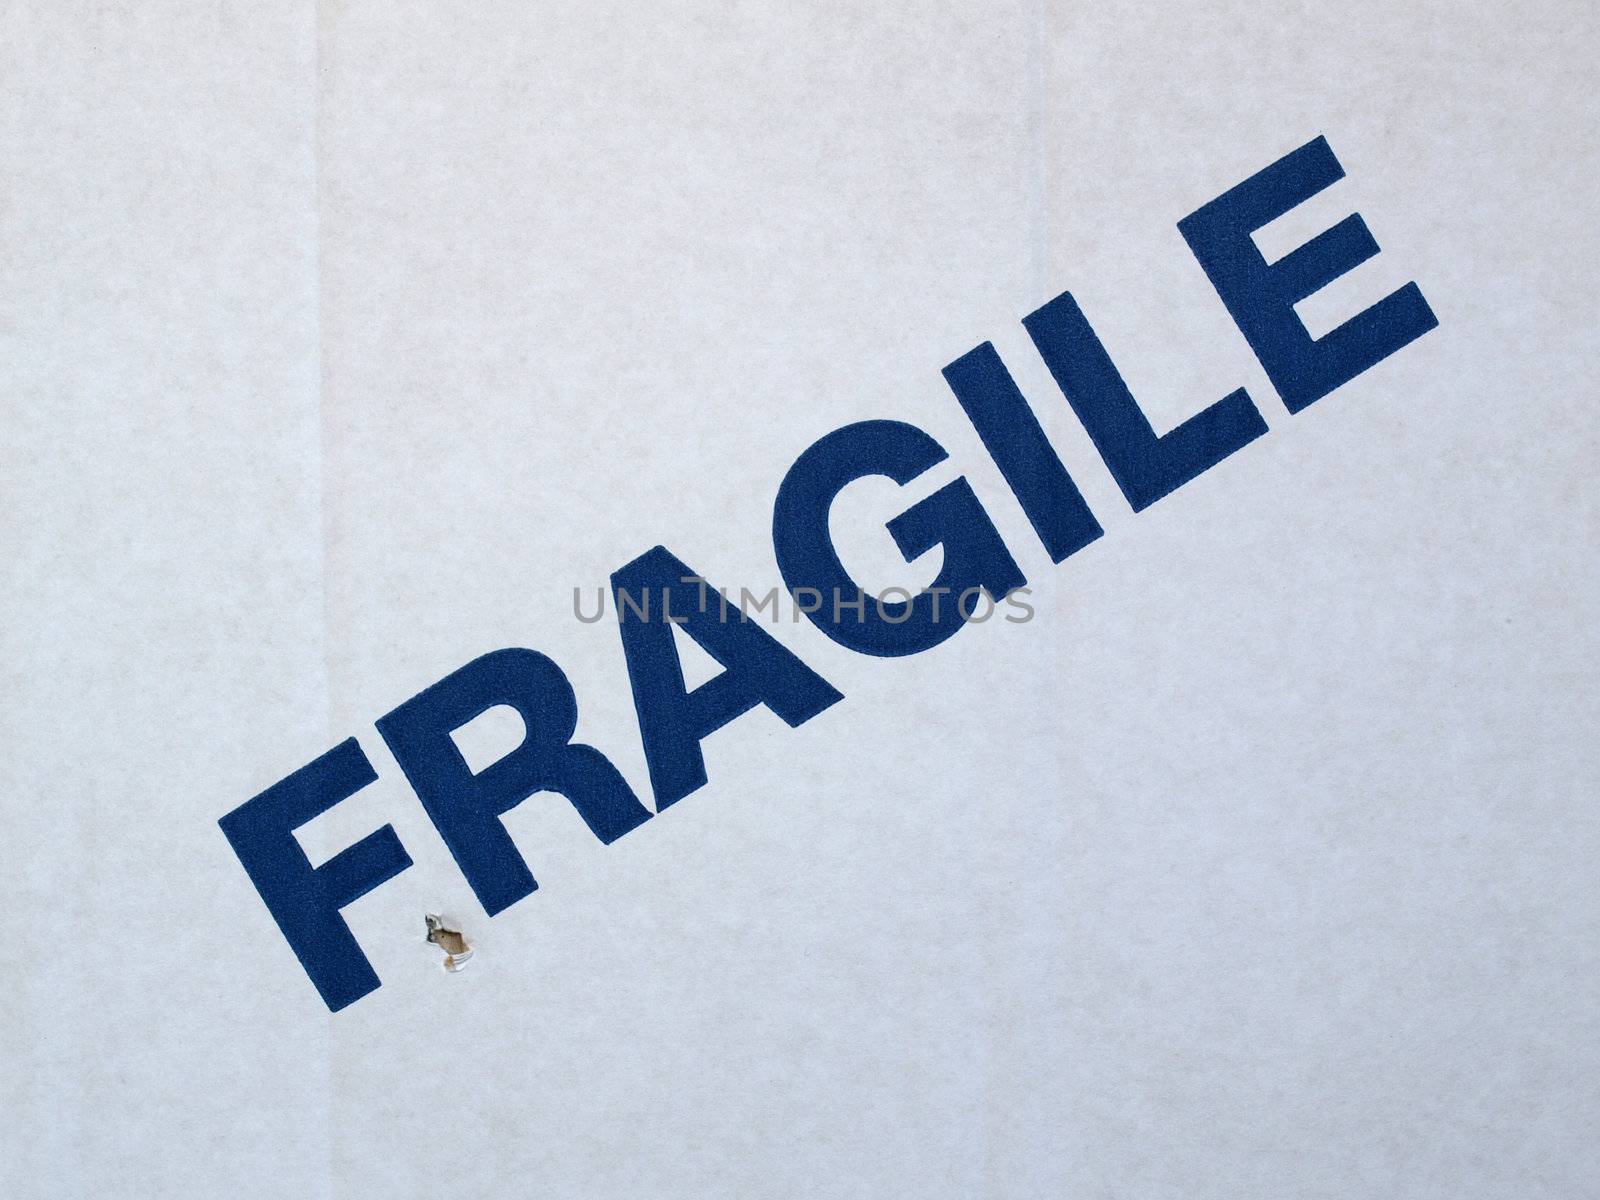 Fragile by paolo77